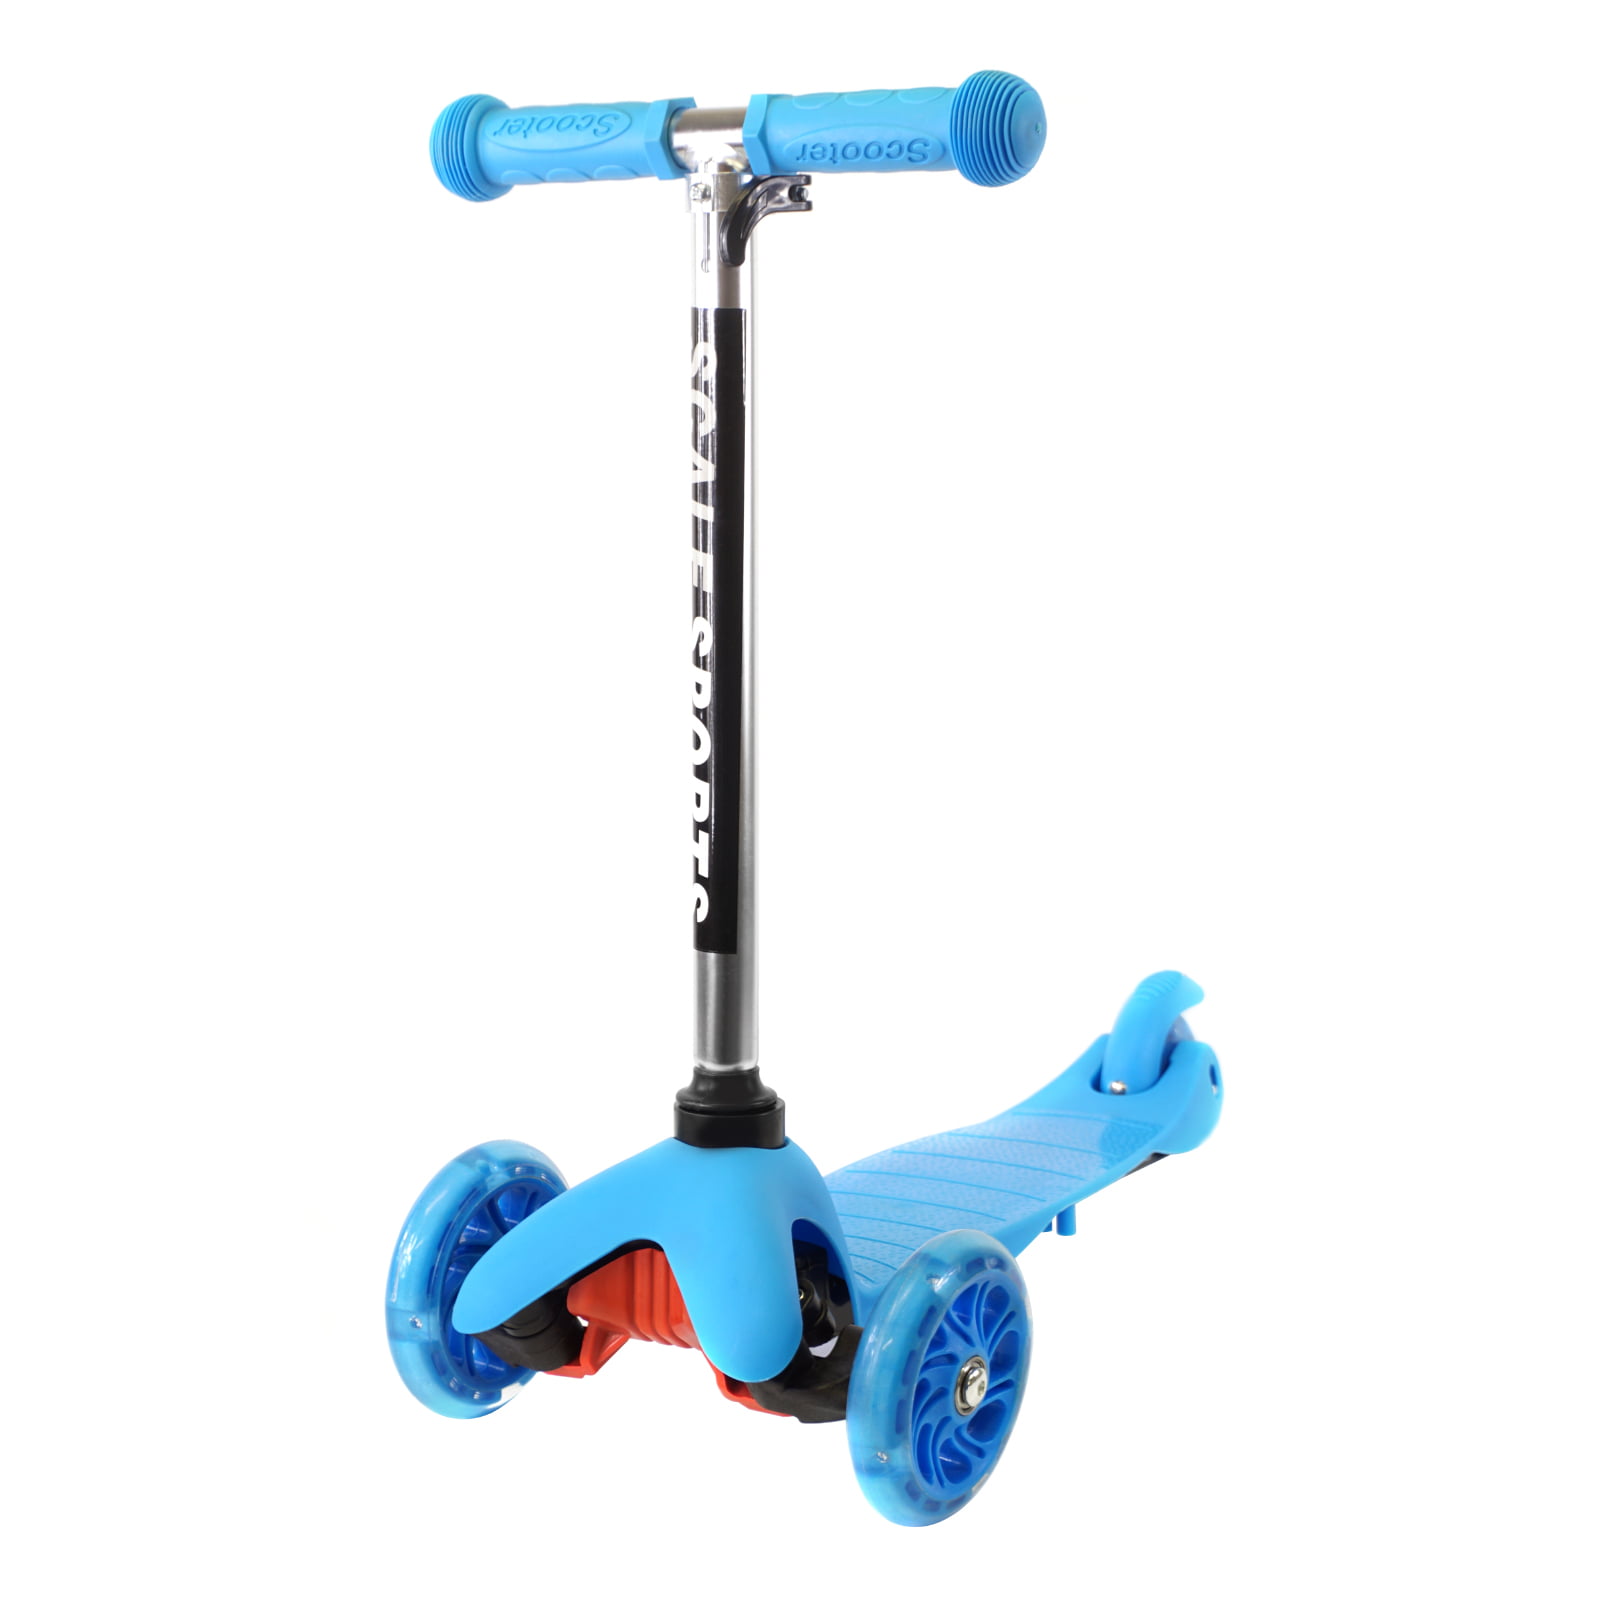 Details about   LED Scooter for Kids Luxury 3 Wheel Glider Adjustable With Kick n Go Lean 2 c 04 